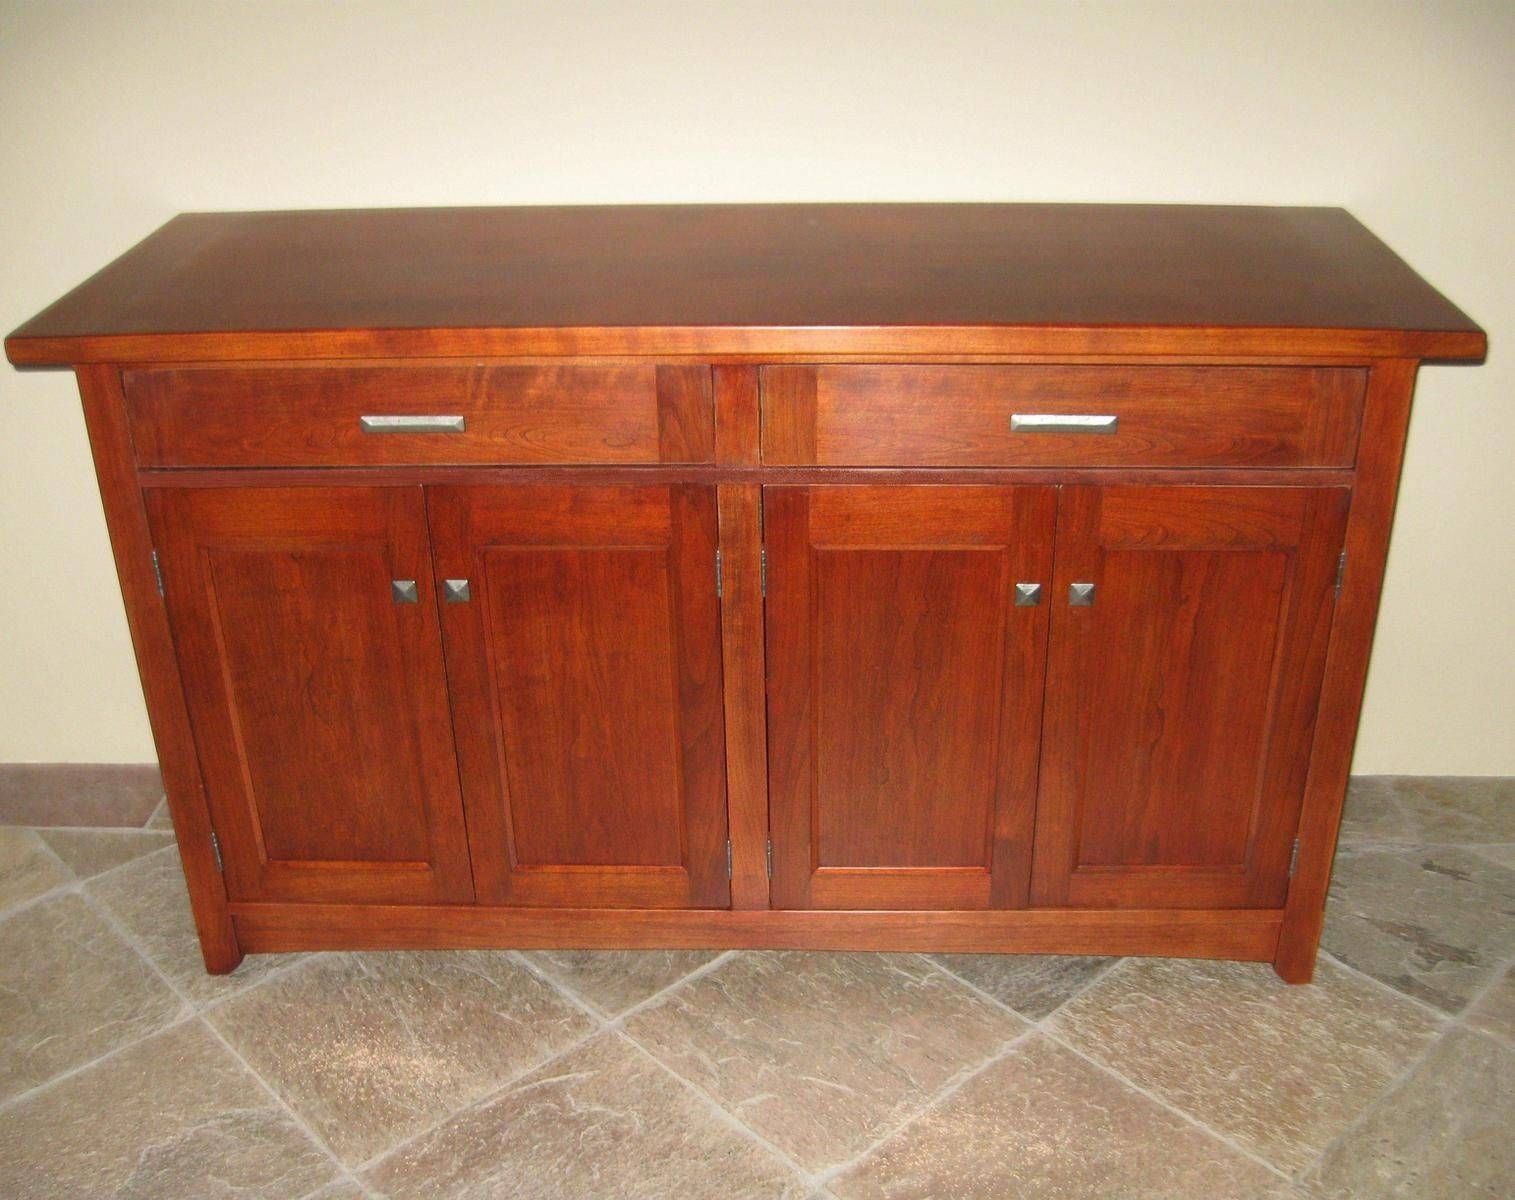 Custom Cherry Sideboardalexander Woodworking | Custommade Within 2018 Cherry Sideboards (View 2 of 15)